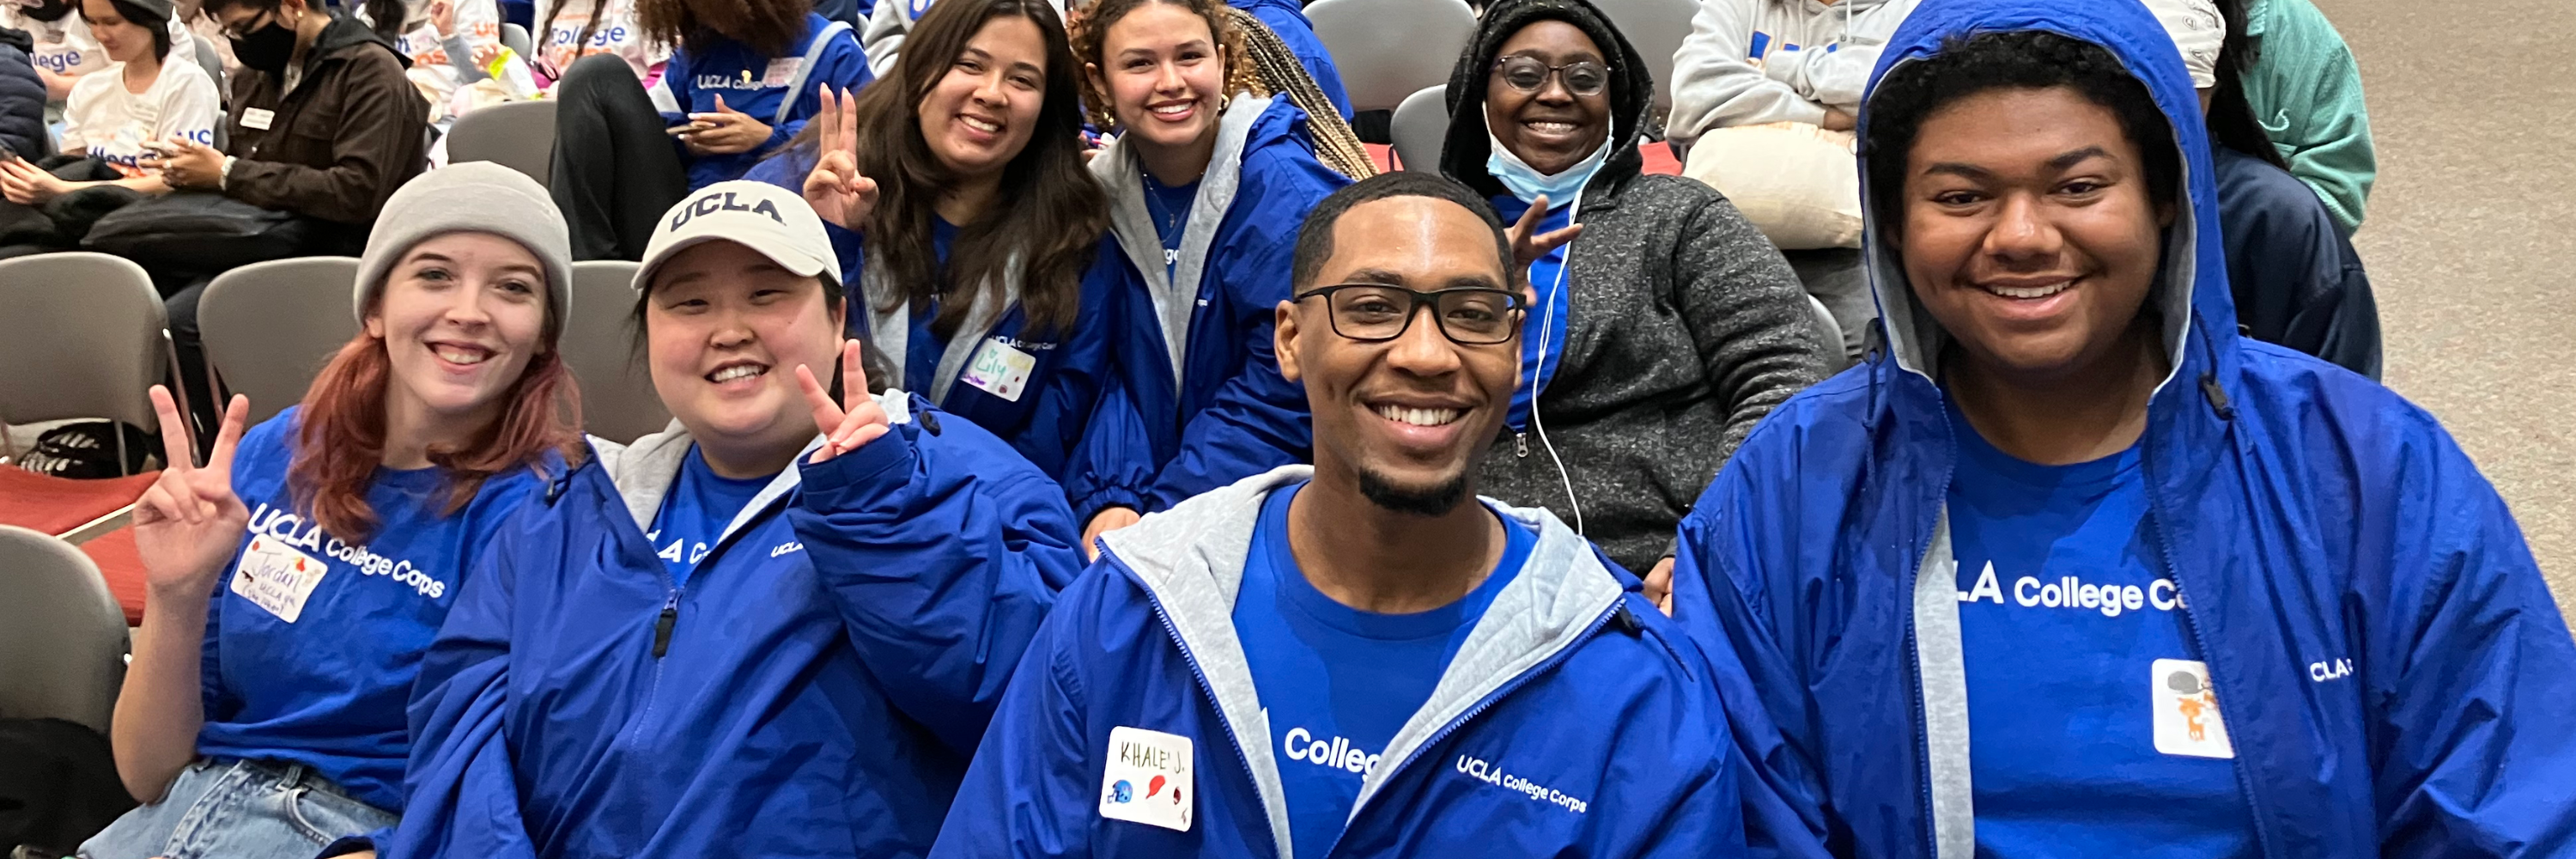 A group of students, 2 male and 5 female, in blue College Corp jackets smile for a photo